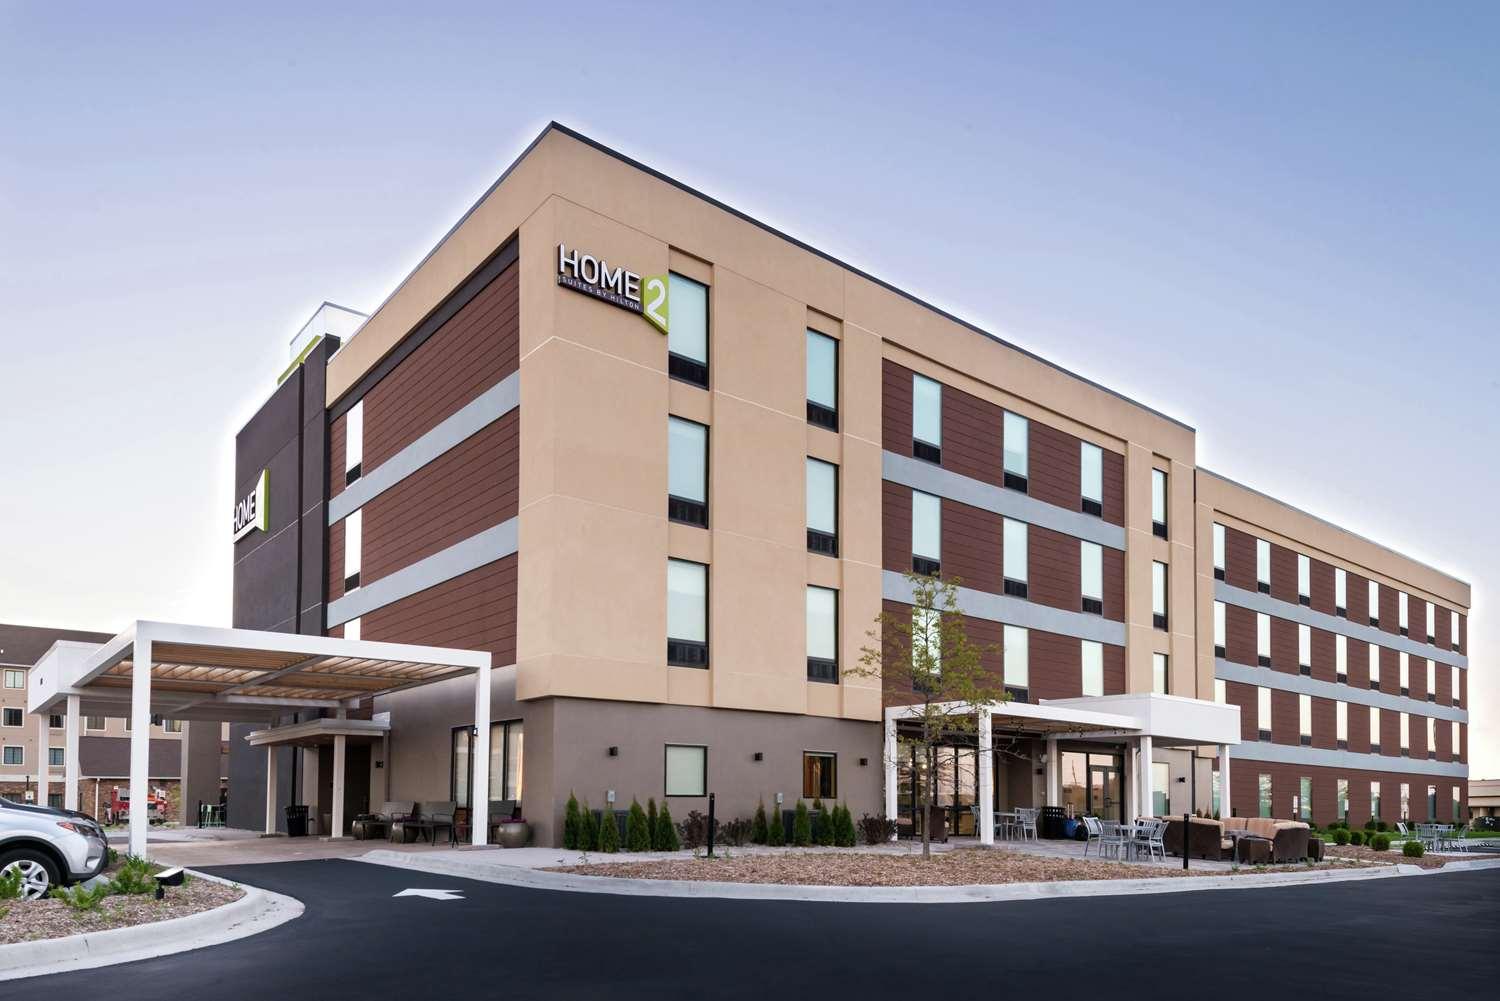 Home2 Suites by Hilton Merrillville in Merrillville, IN